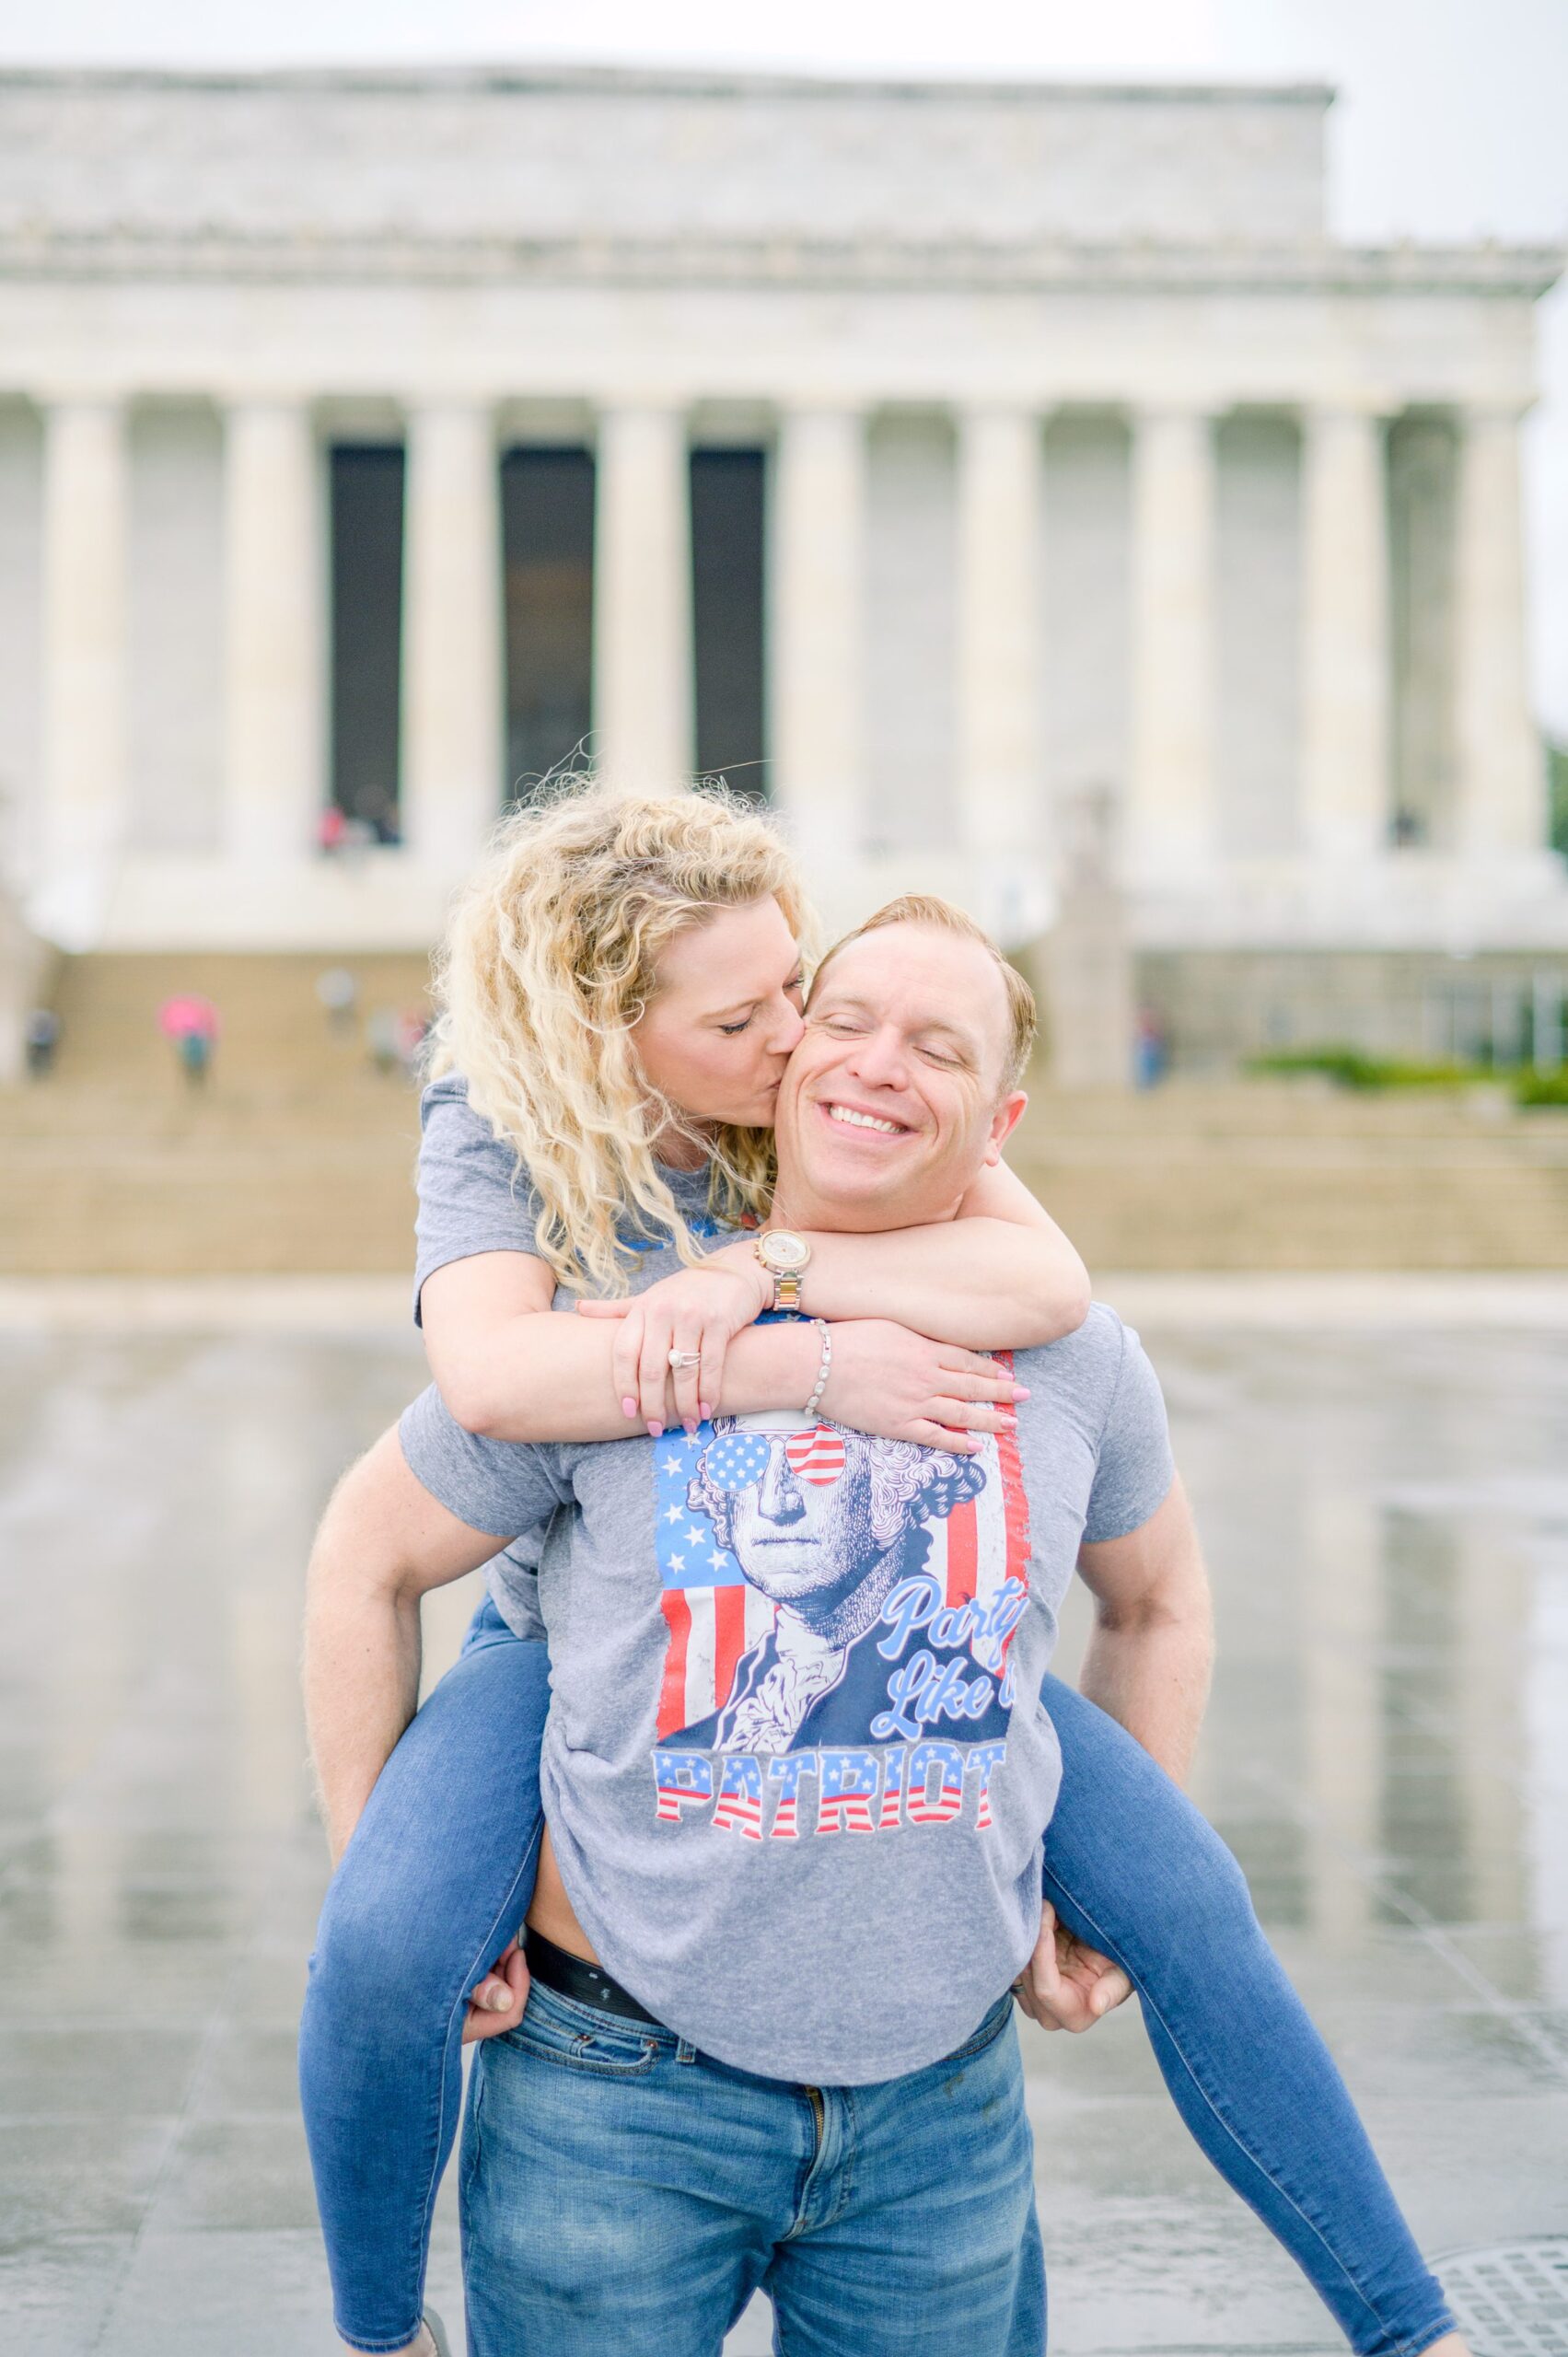 Anniversary portrait session at the Lincoln Memorial featuring the Washington DC Cherry Blossoms. Photographed by Baltimore Photographer Cait Kramer Photography